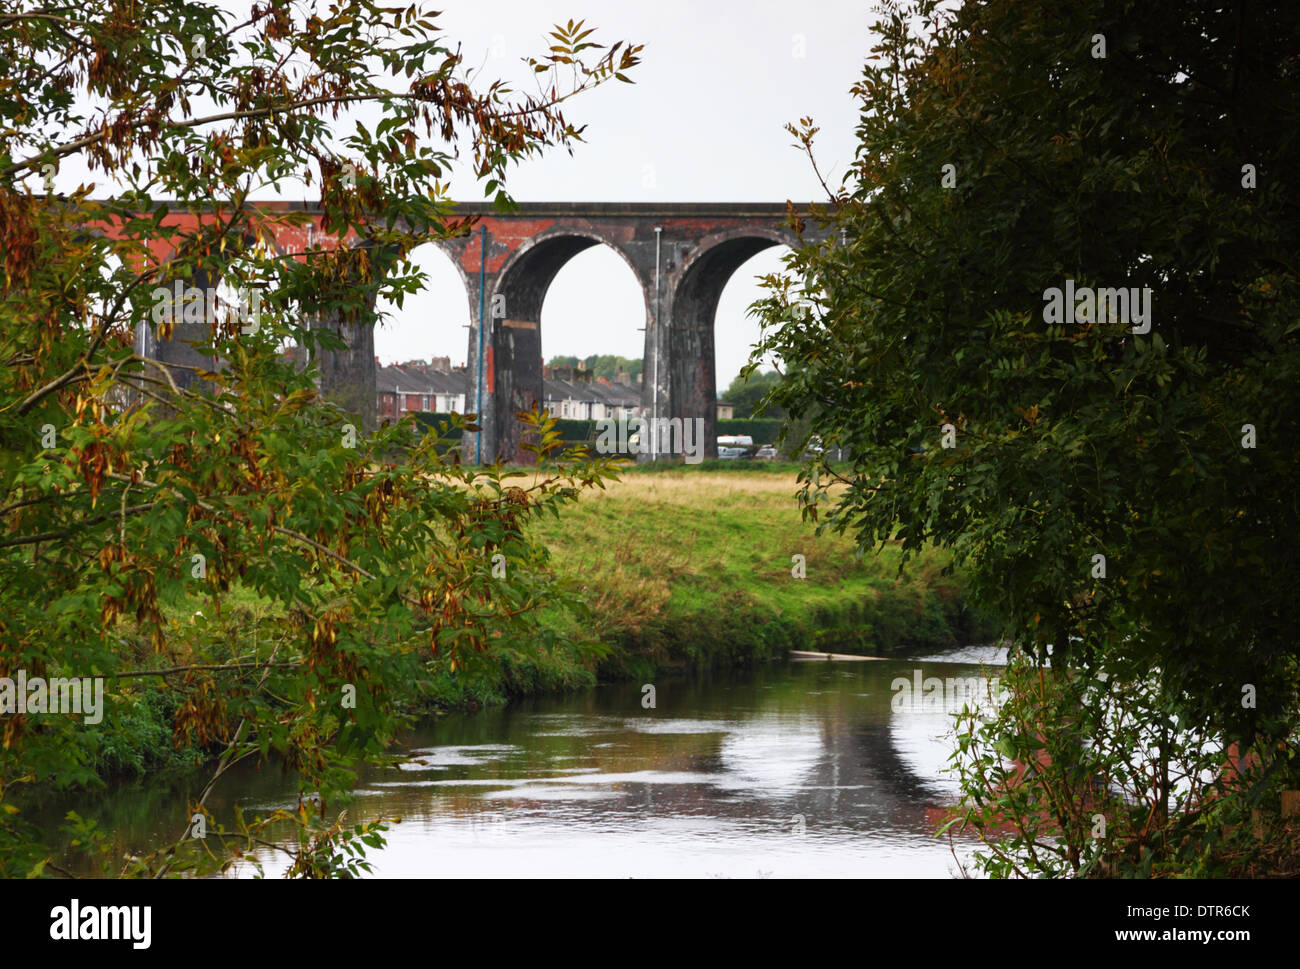 Viaduct over the Calder at Whalley, Lancashire. Carries the railway from Blackburn to Clitheroe. Known as the 'Whalley Arches'. Stock Photo